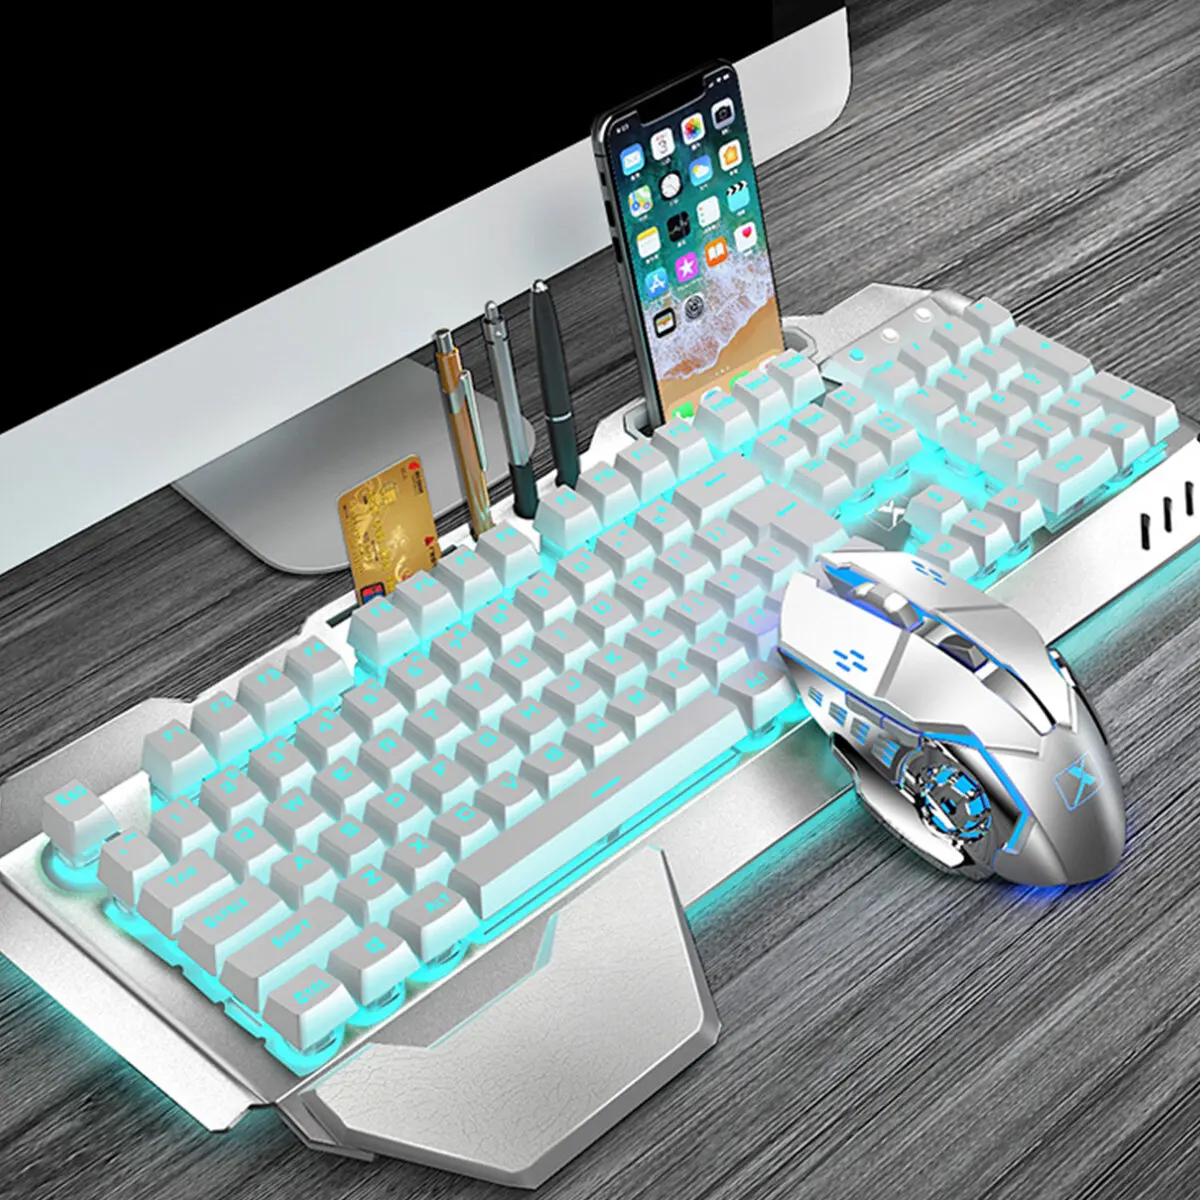 2.4G Wireless Gaming Keyboard & Mouse Set Rechargeable RGB Breathing Backlit Gaming Keyboard 2400DPI Mouse enlarge